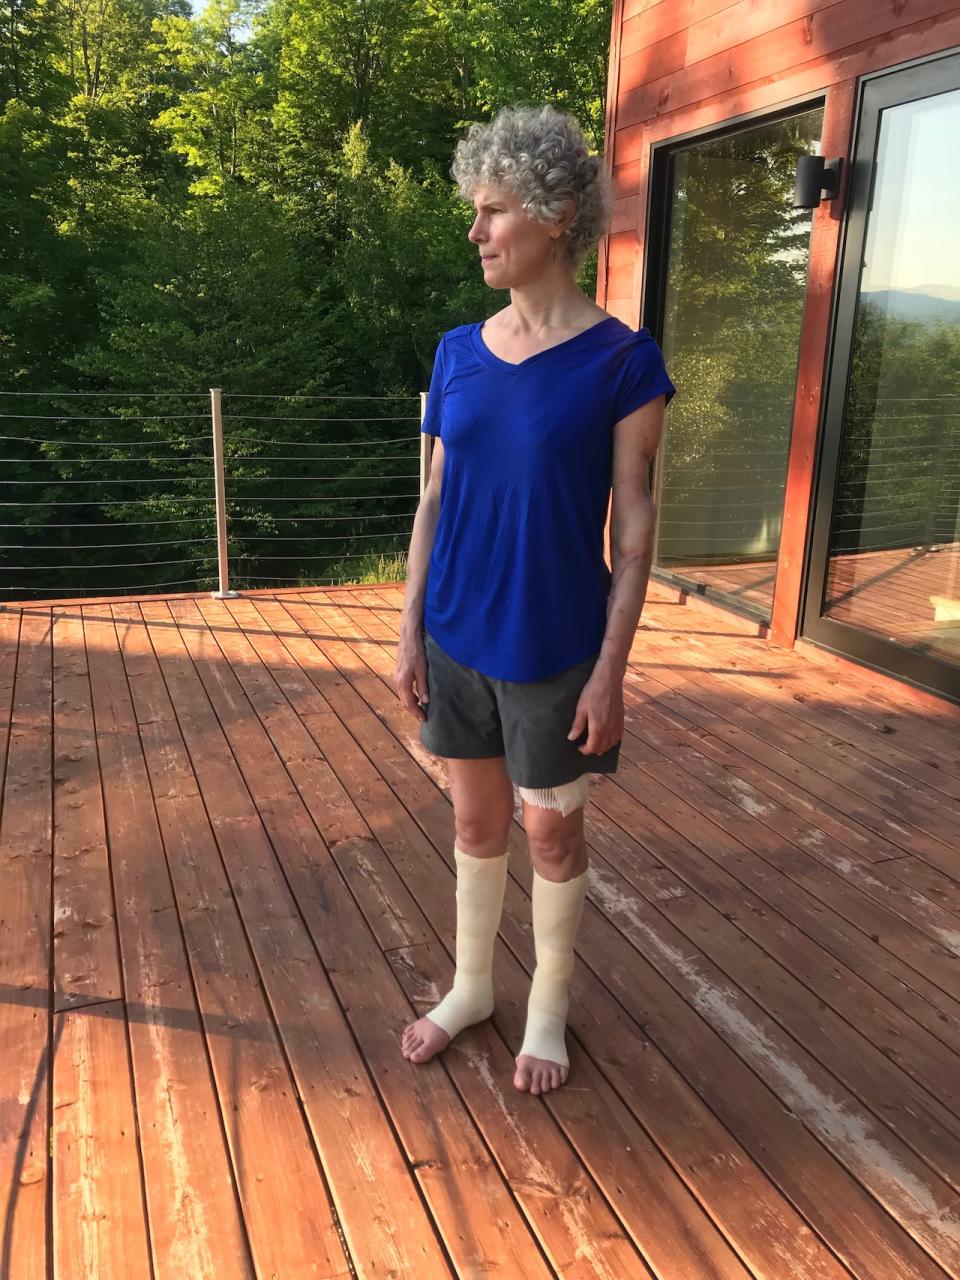 Dominique Alain's legs and arm still bear the scars left by her canine attackers, leaving her wounded and disfigured for life.